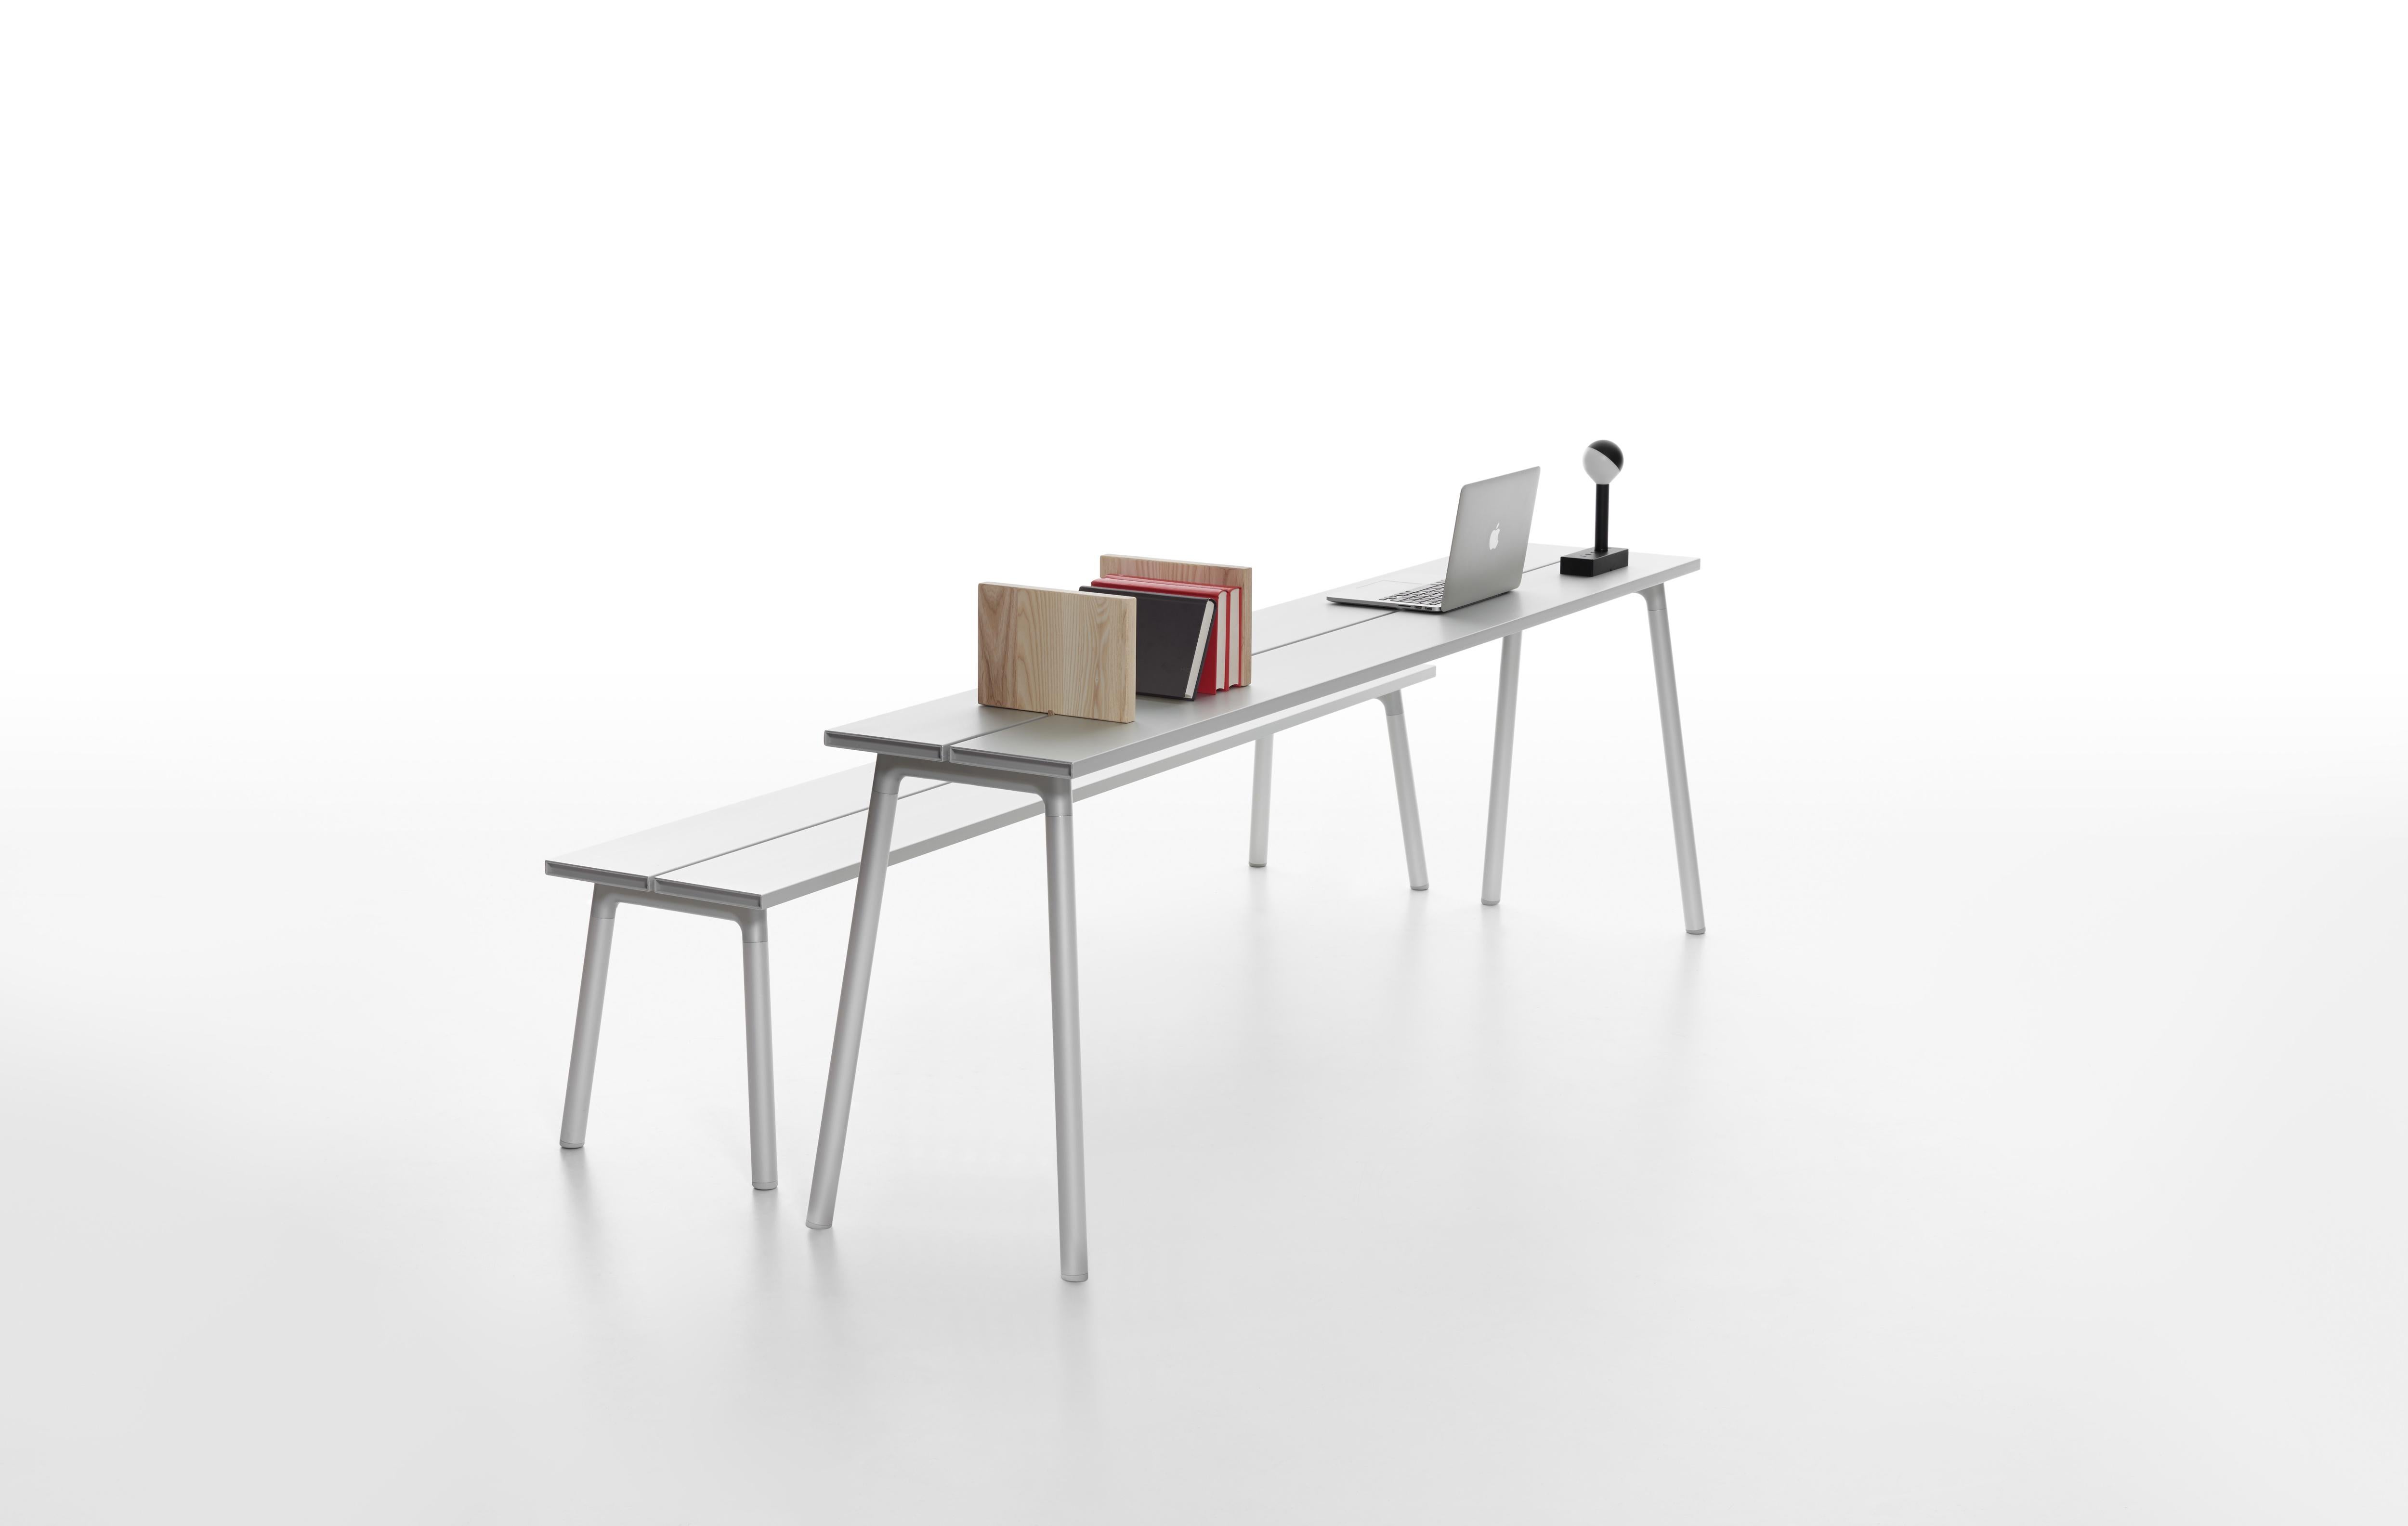 Emeco Run 3-Seat Bench in Aluminum and Ash by Sam Hecht & Kim Colin For Sale 1